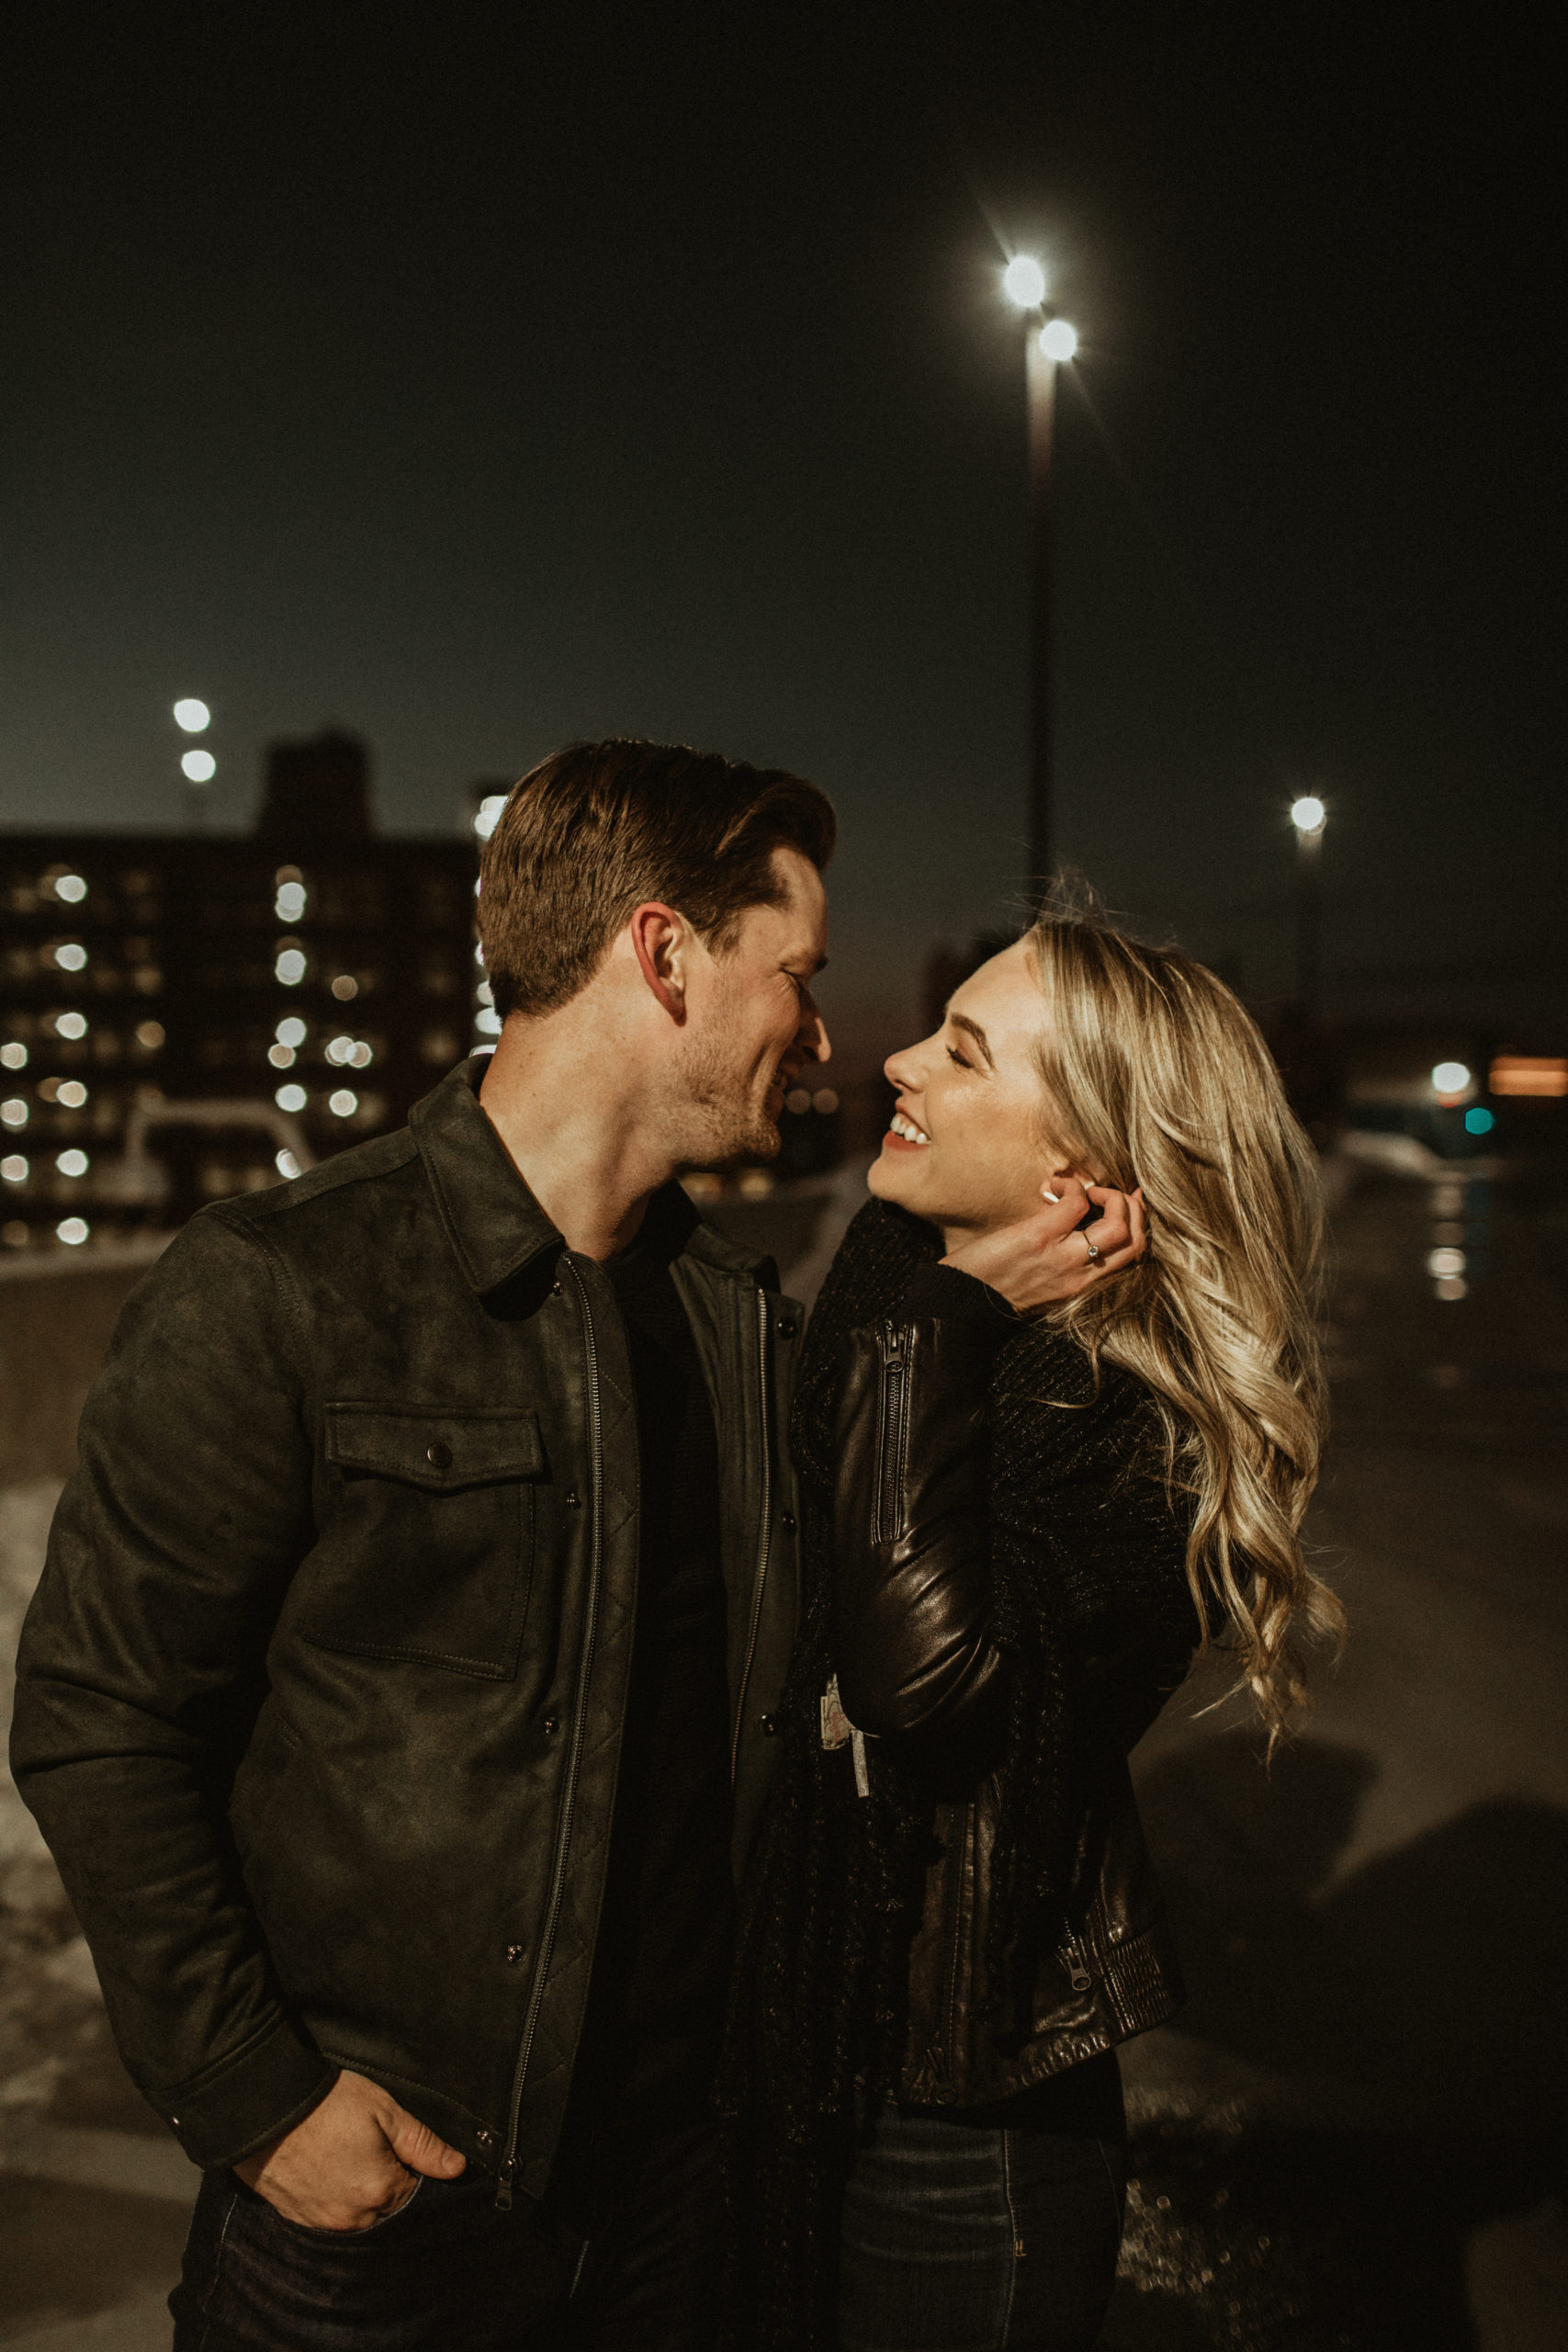 low light night photography couple detroit engagement photos photography education tips and tricks